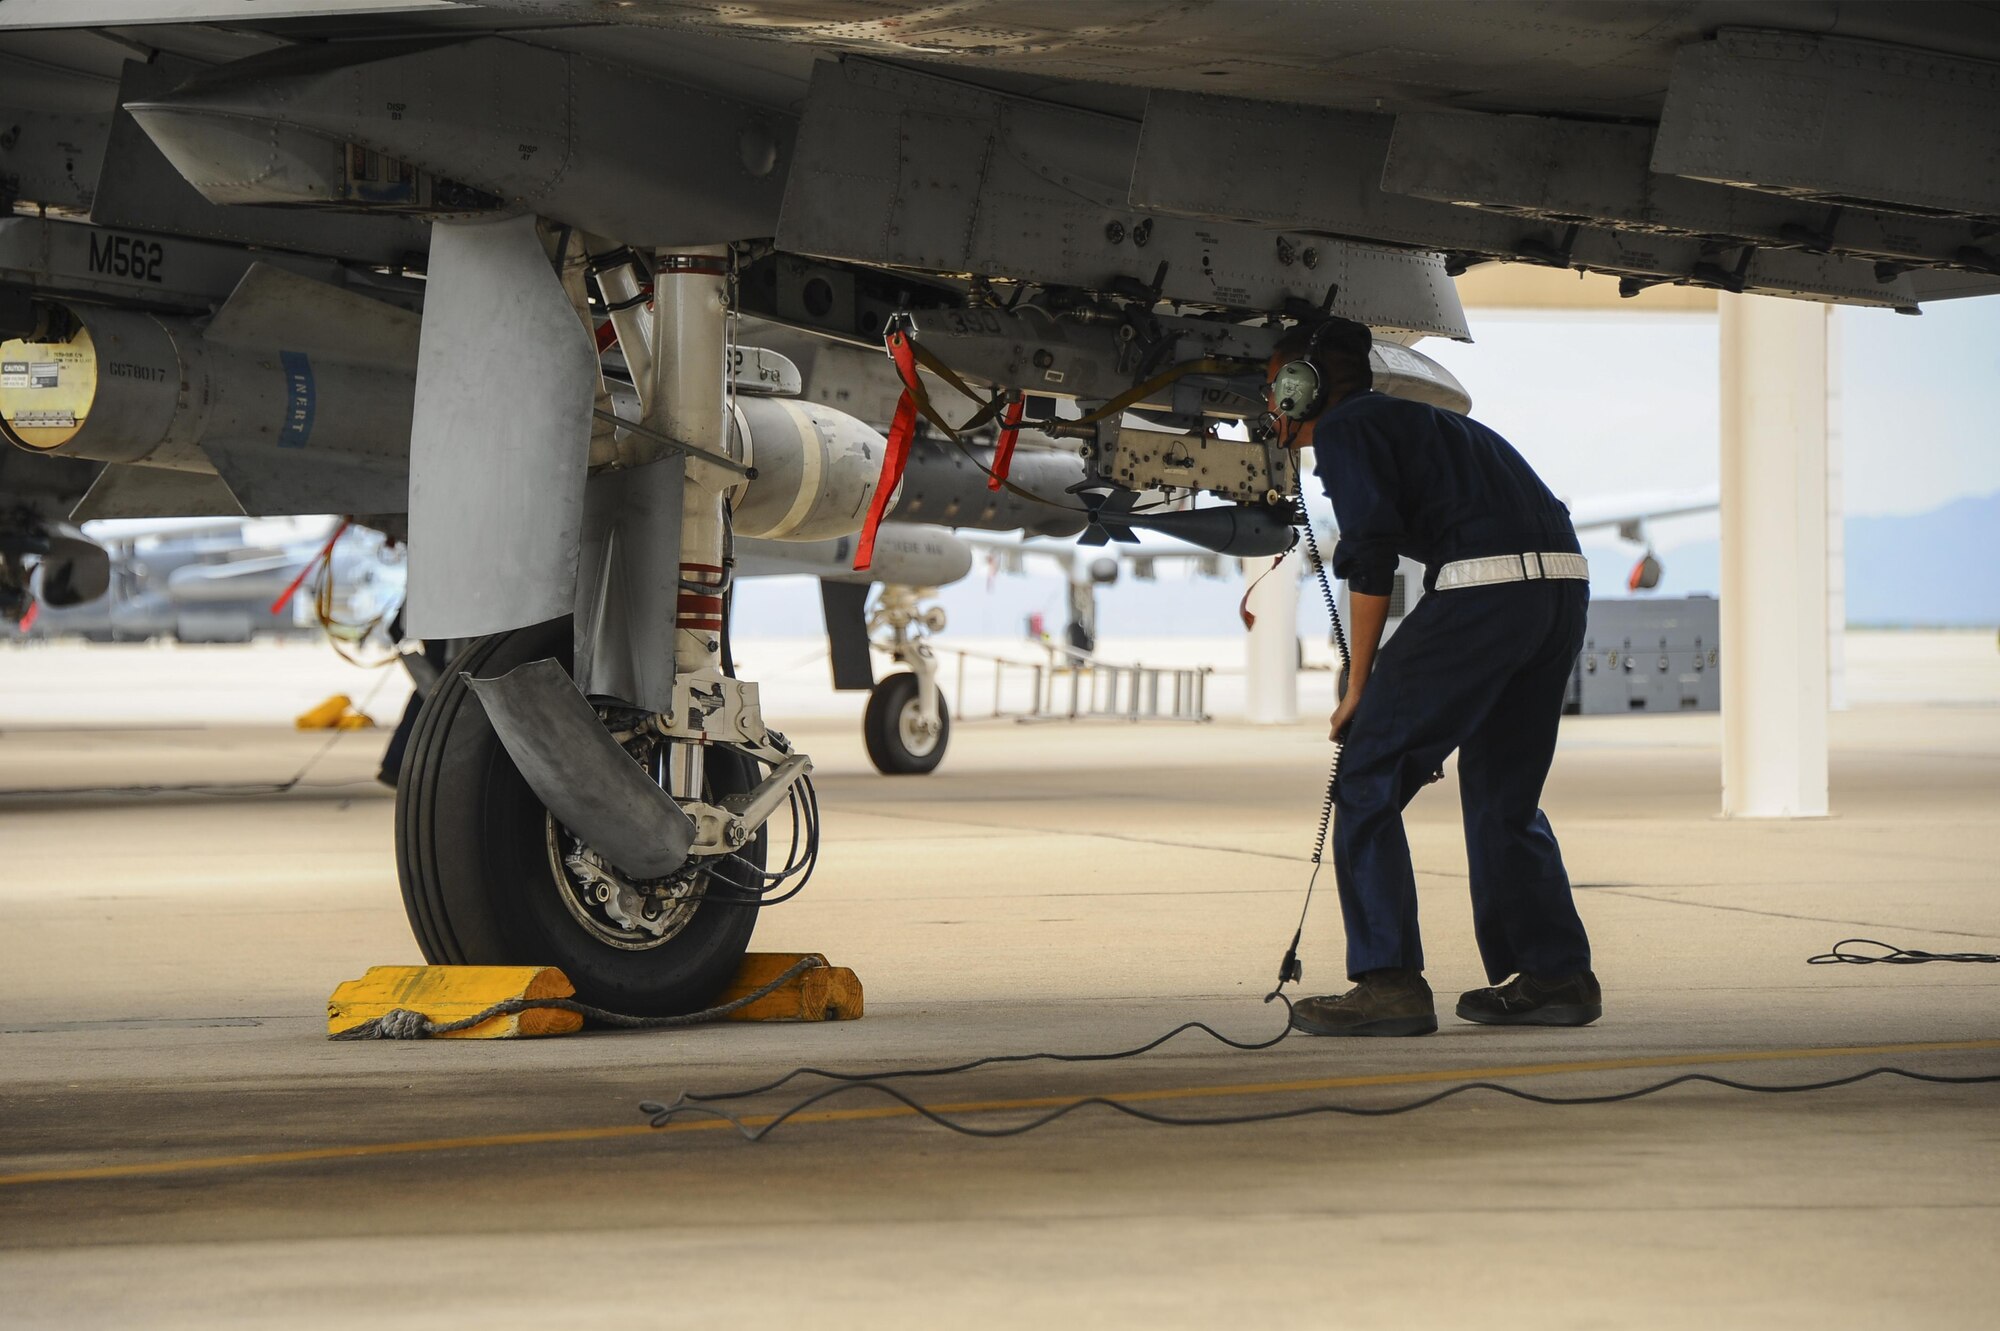 U.S. Air Force Senior Airman Andy Bui, 355th Aircraft Maintenance Squadron A-10C Thunderbolt II crew chief, performs an operational check on the flightline at Davis-Monthan Air Force Base, Ariz., June 23, 2016. The 355th AMXS develops and executes scheduled maintenance and provides forces to support worldwide contingency tasking. (U.S. Air Force photo by Airman 1st Class Mya M. Crosby/Released)